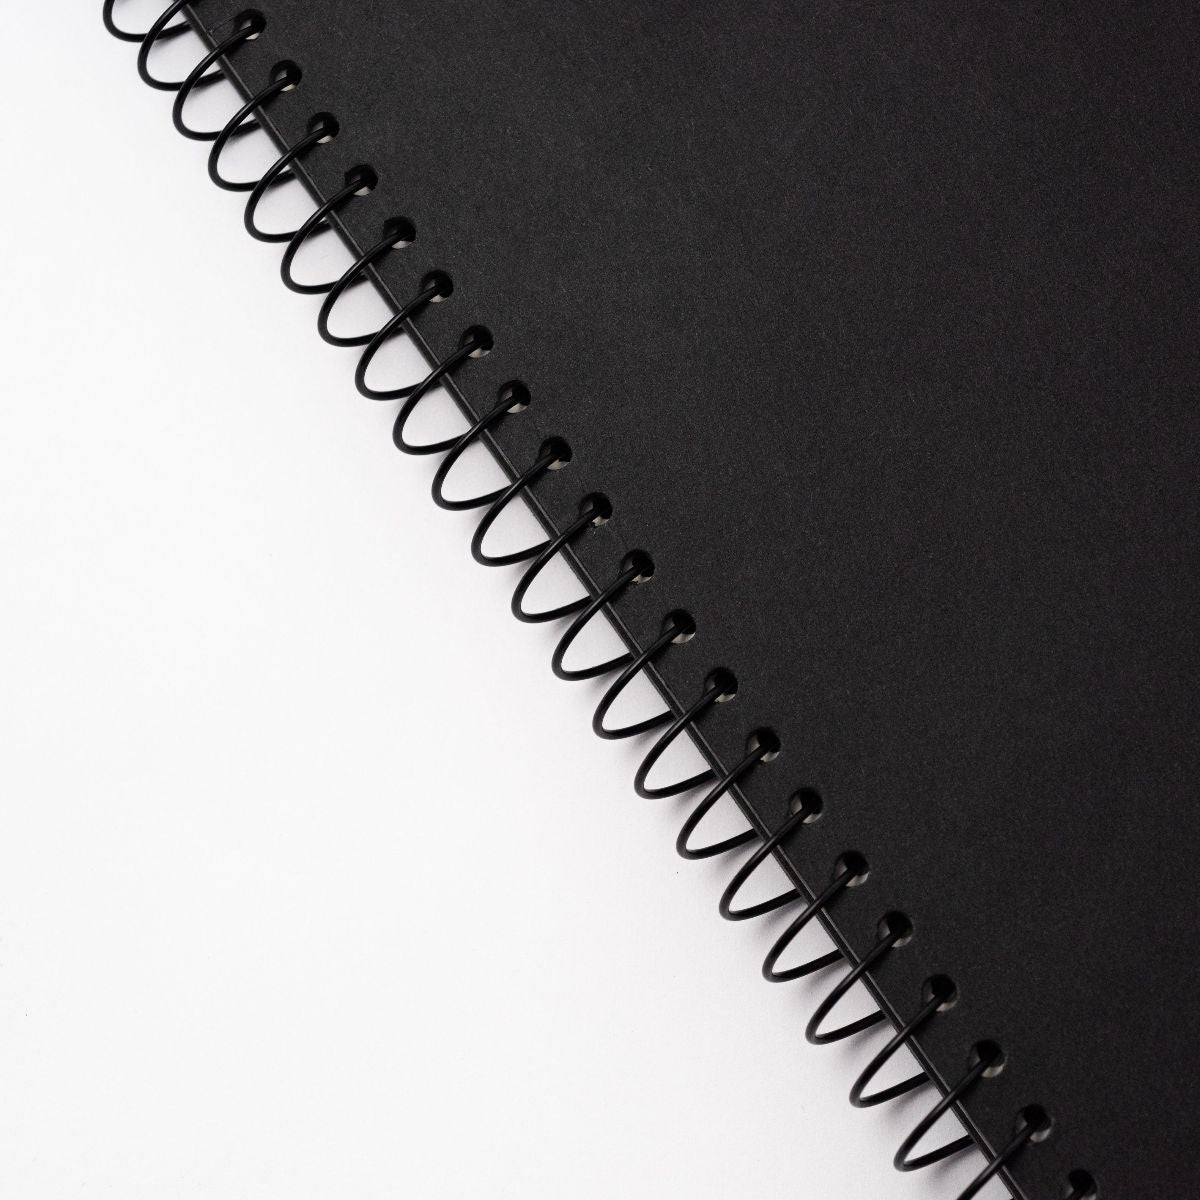 Black Paper Inner Page Creative Blank Black Card Diary Notebook